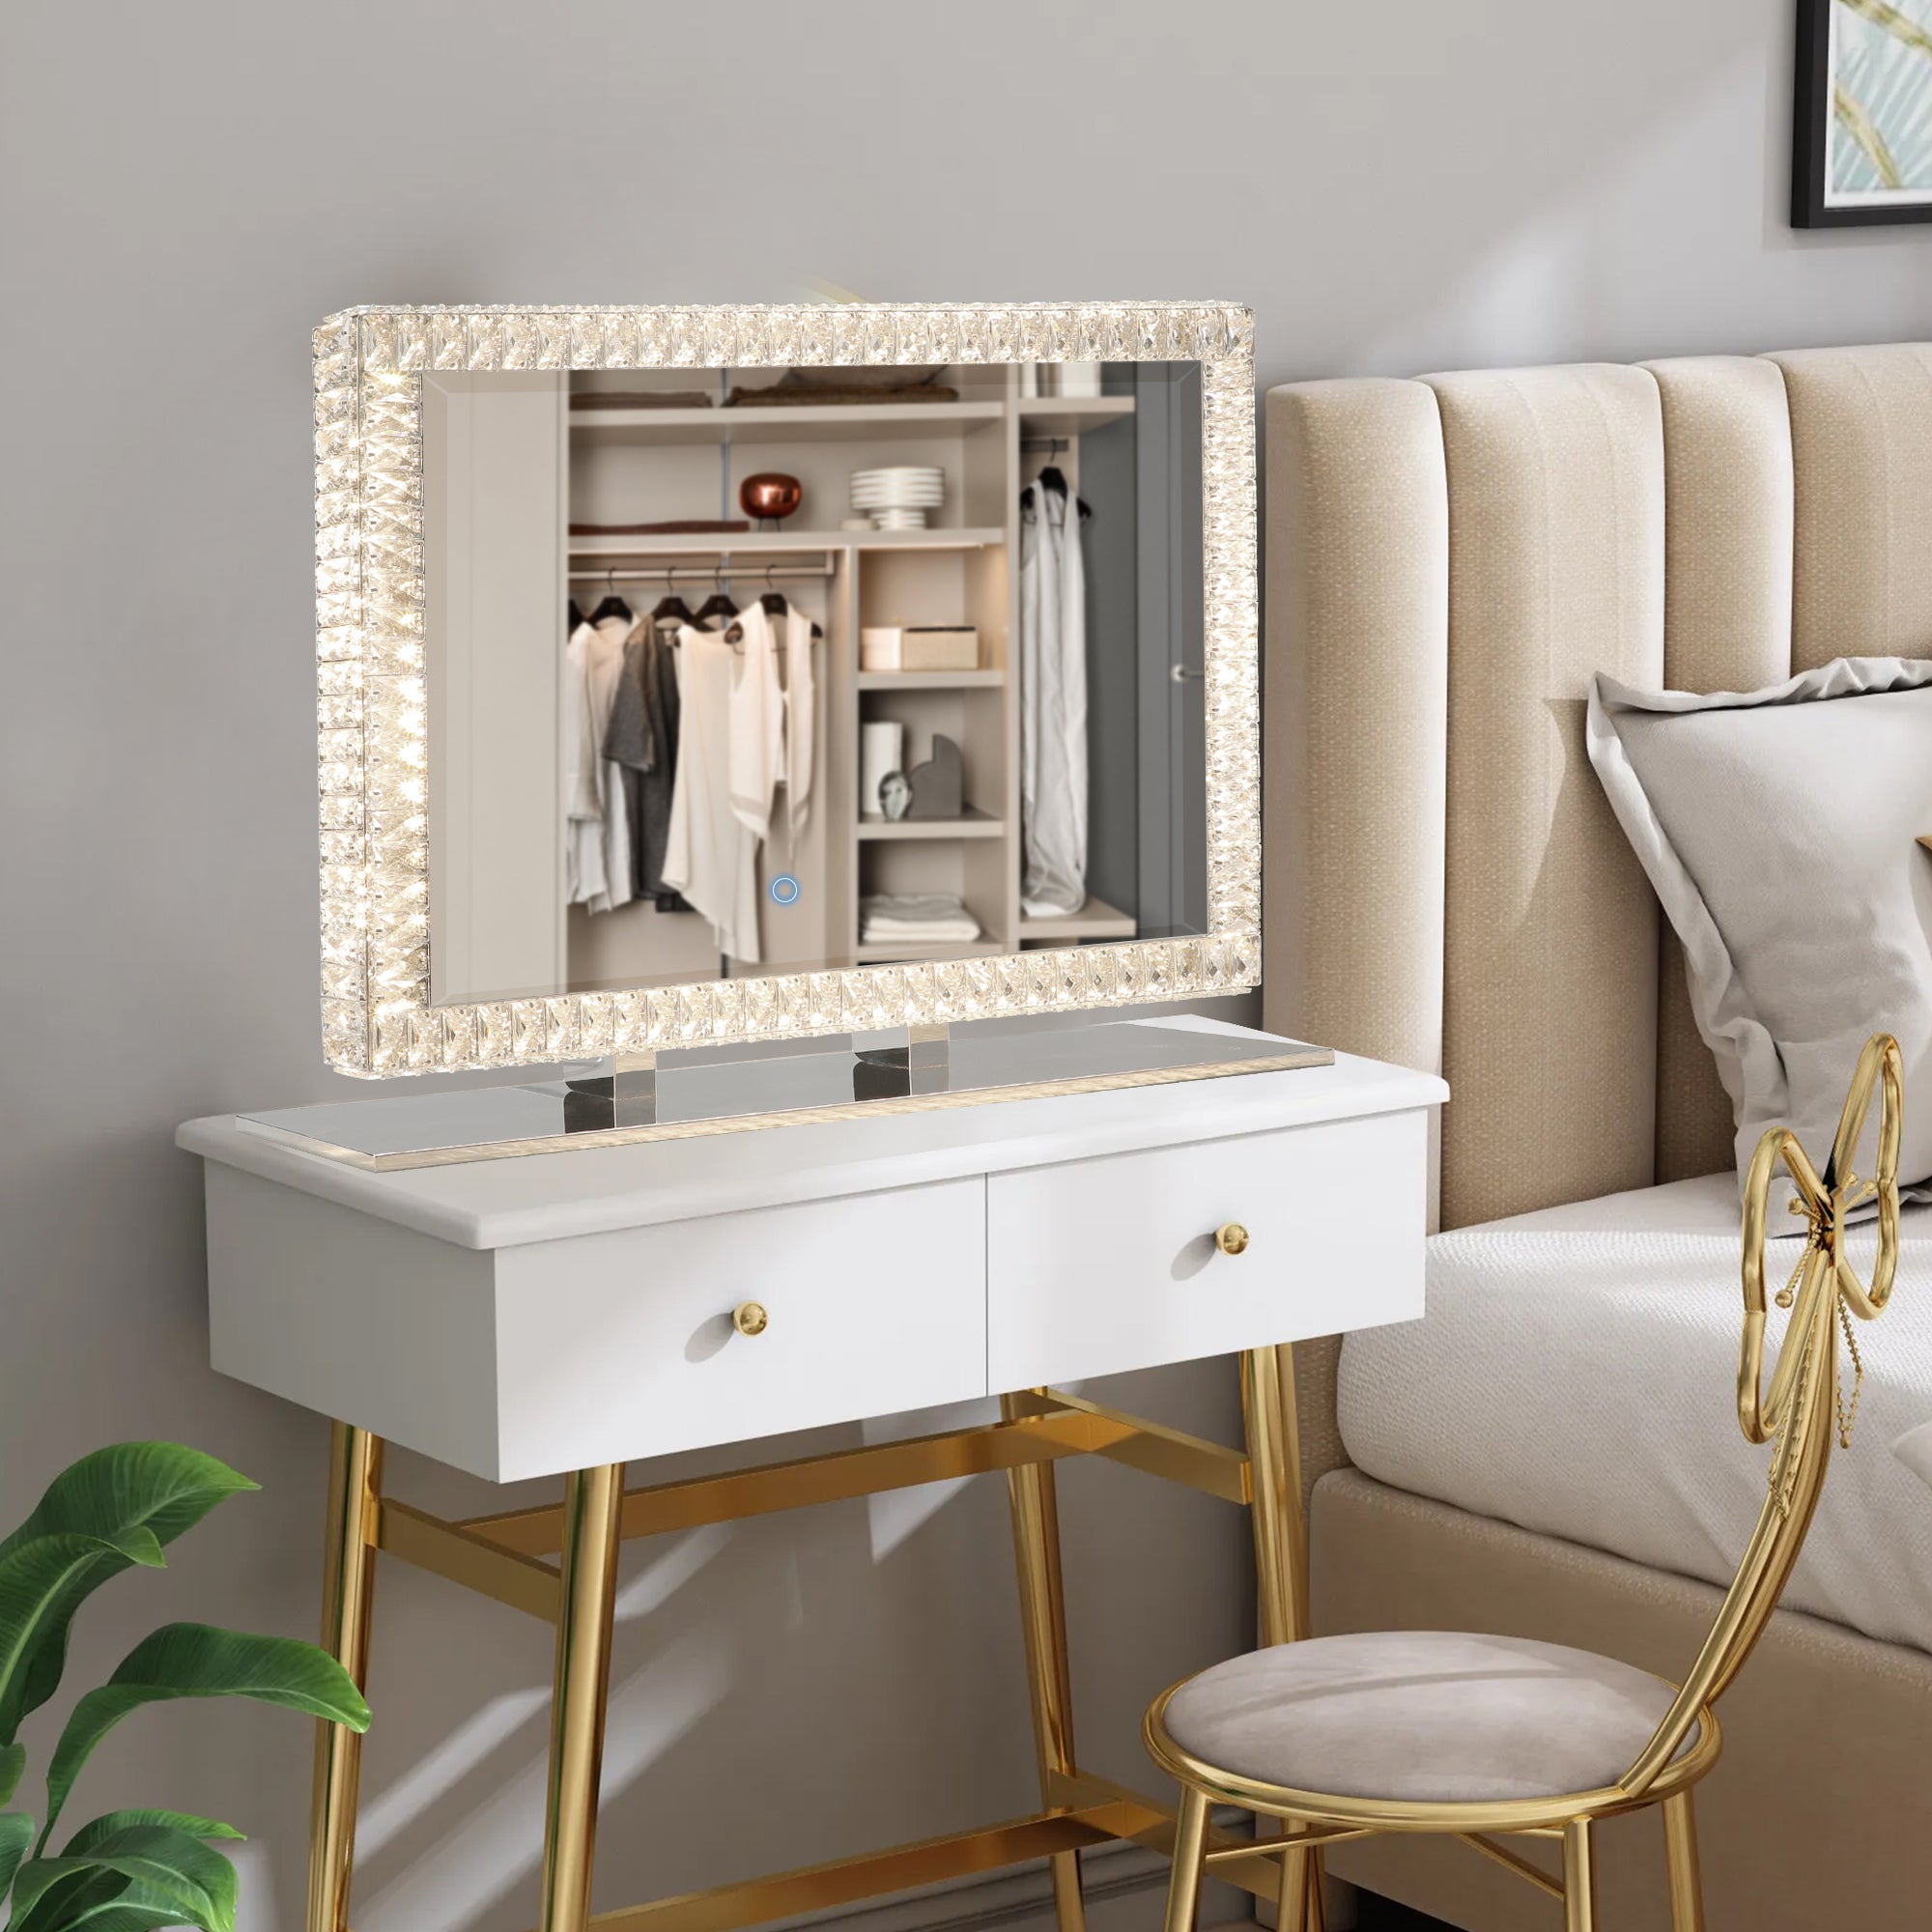 Eden35.43" x 27.56" Luxurious LED Mirror with Crystal Frame and Touch Control Dimmable Lights